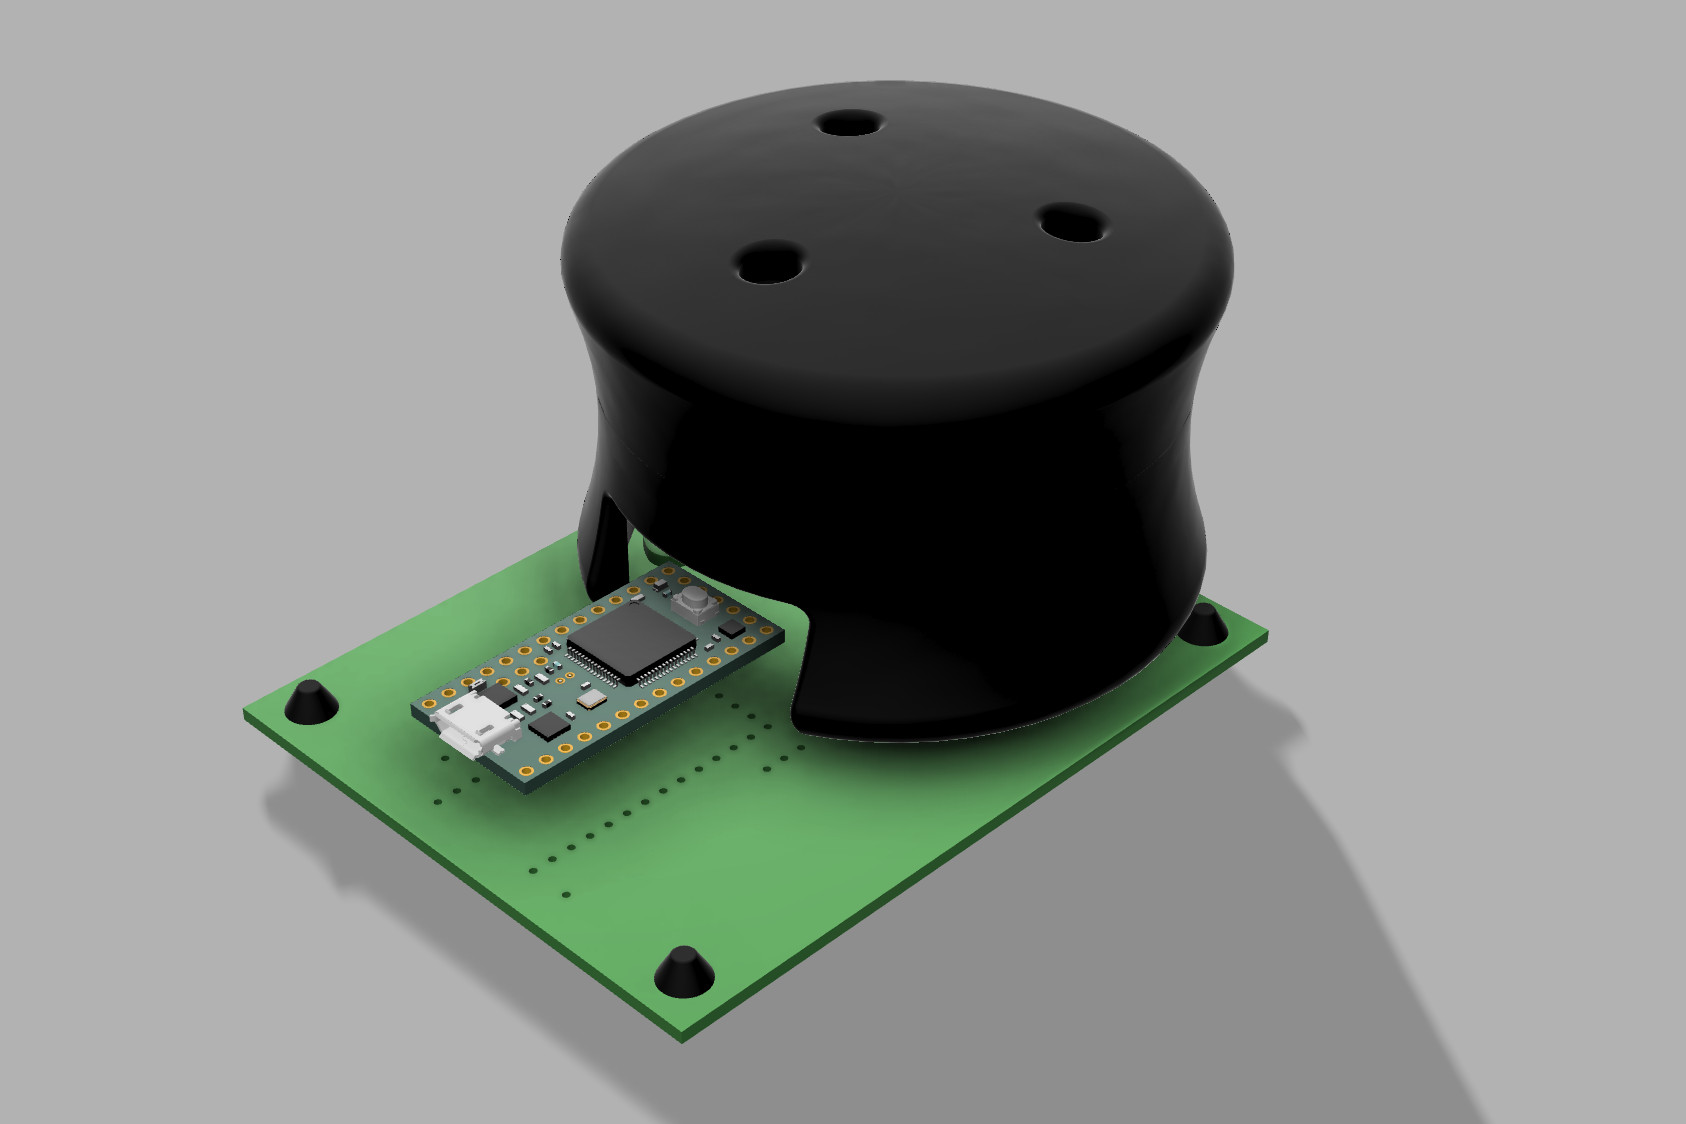 A 3D rendering of the Haptick device with a big cylindrical knob over the top of it.